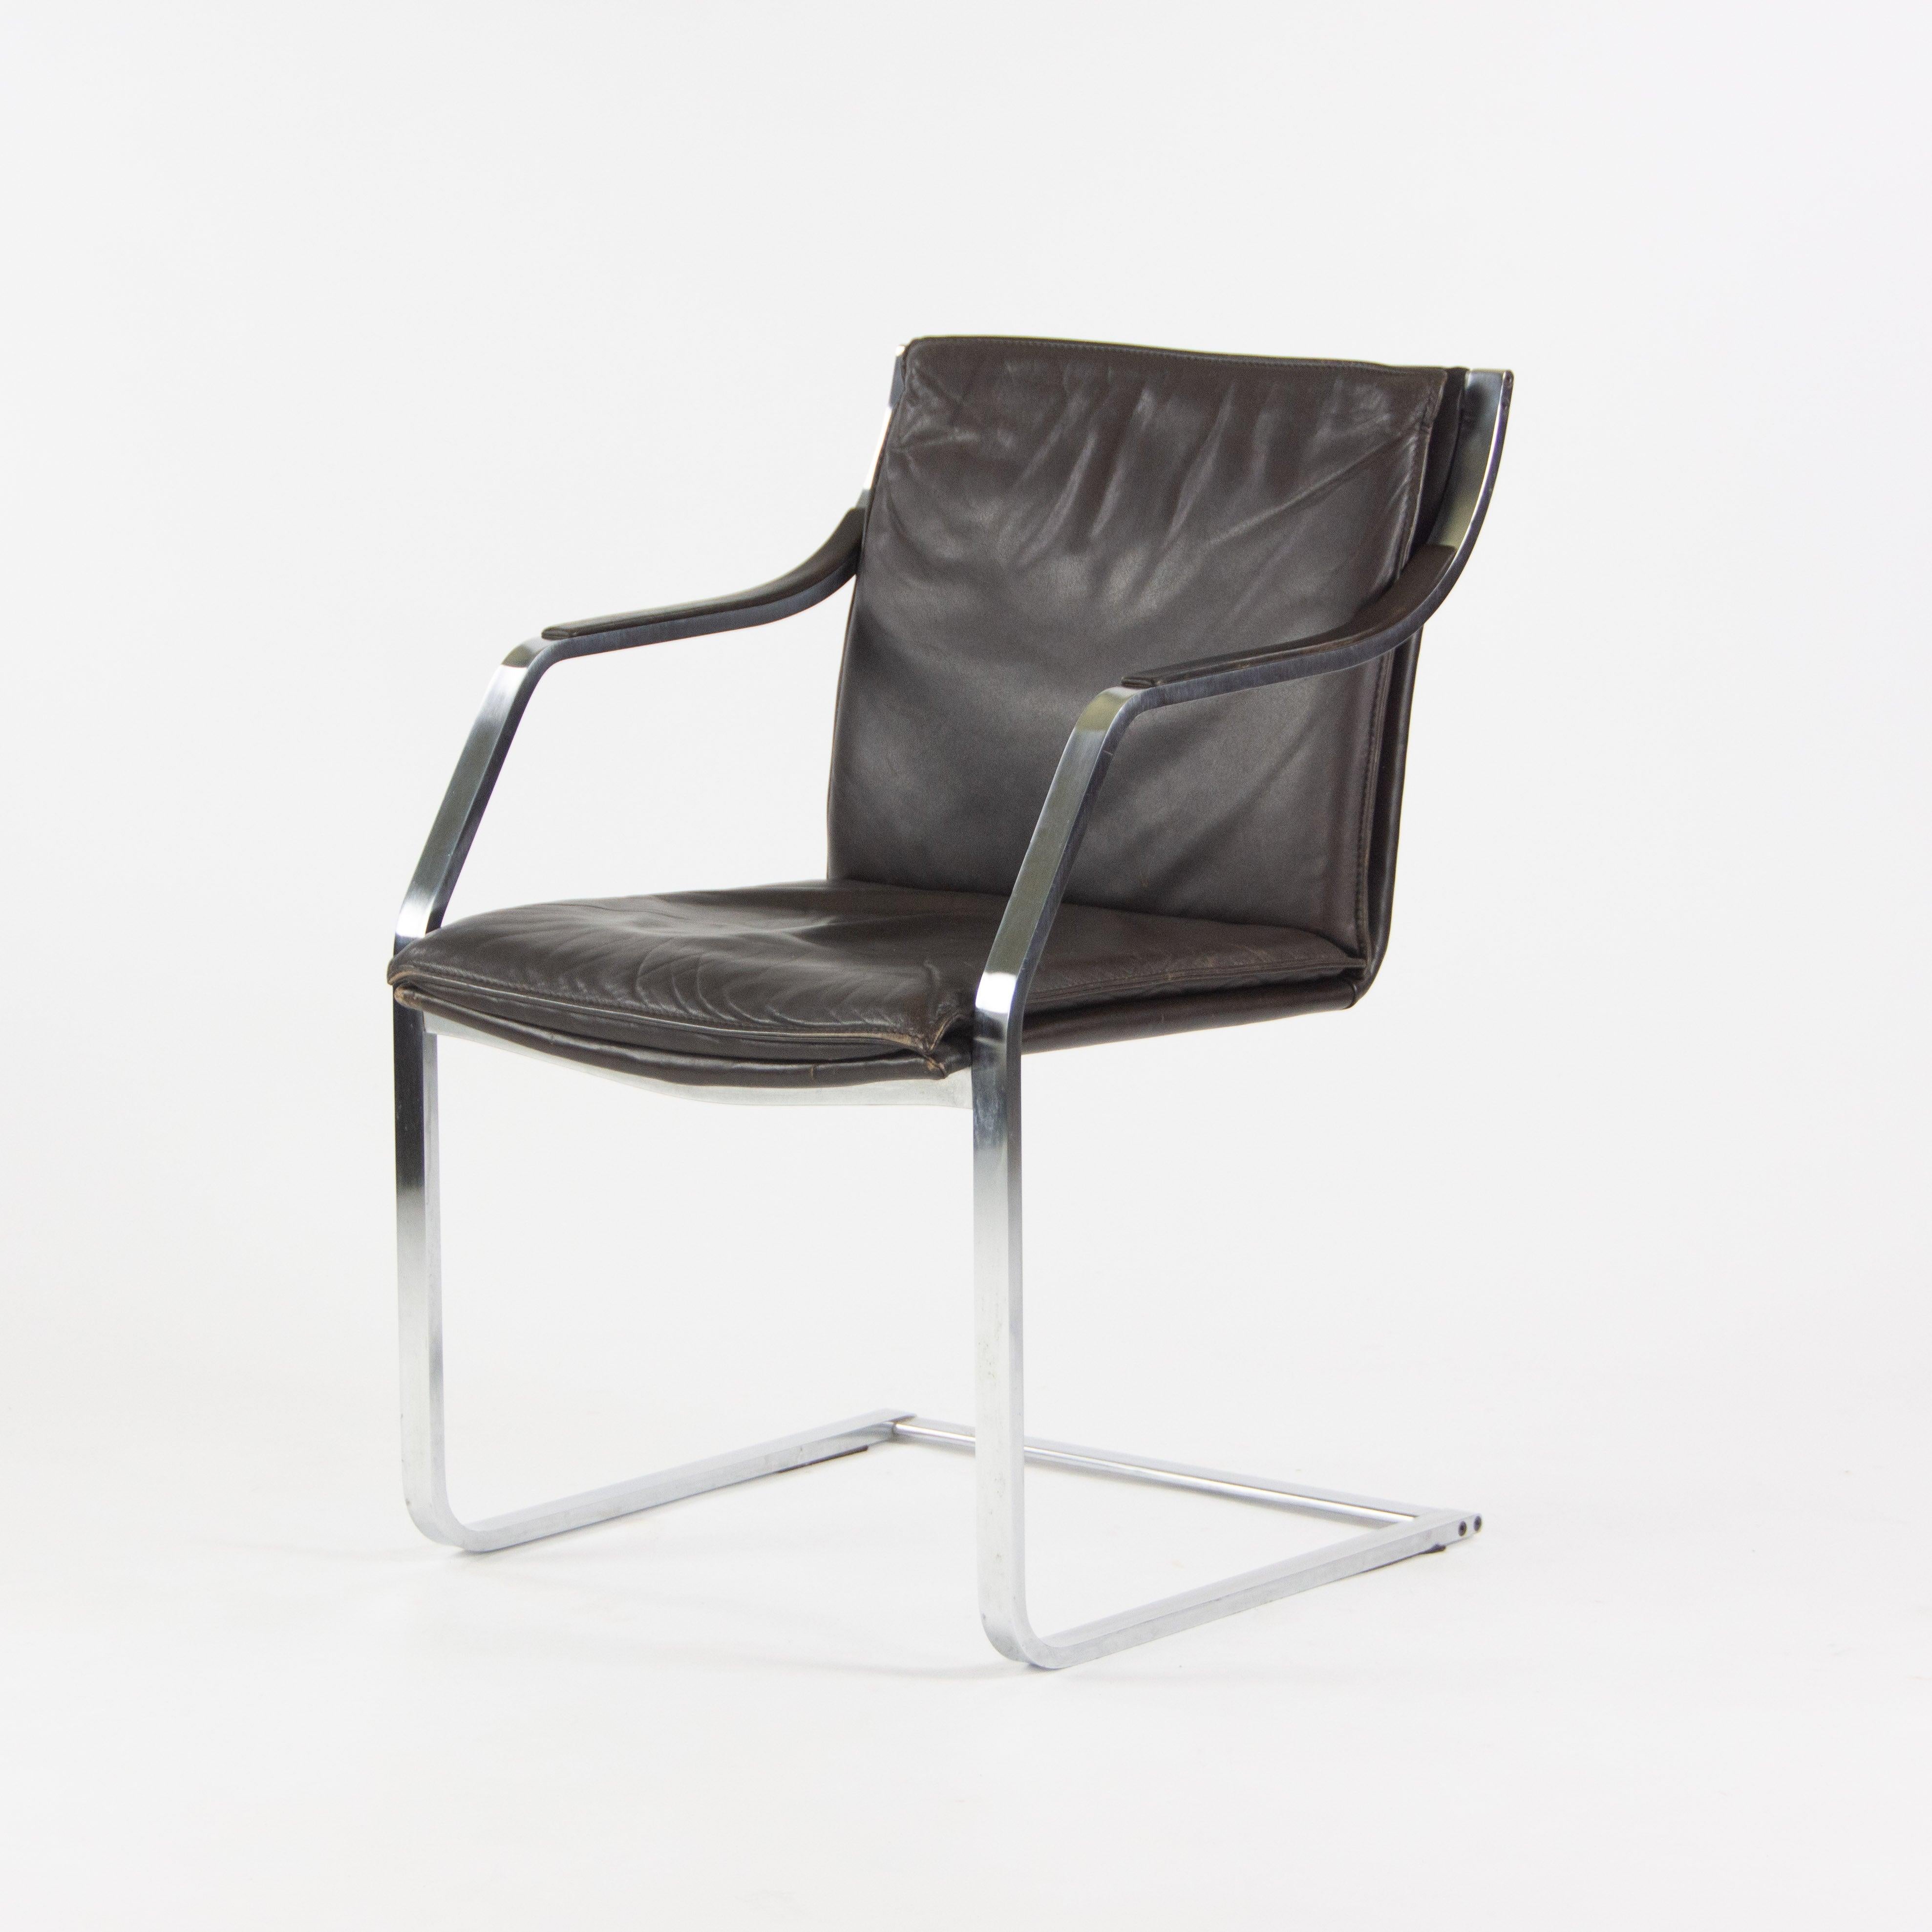 Rudolf B. Glatzel Vintage Walter Knoll Art Collection Leather & Stainless Chair For Sale 3